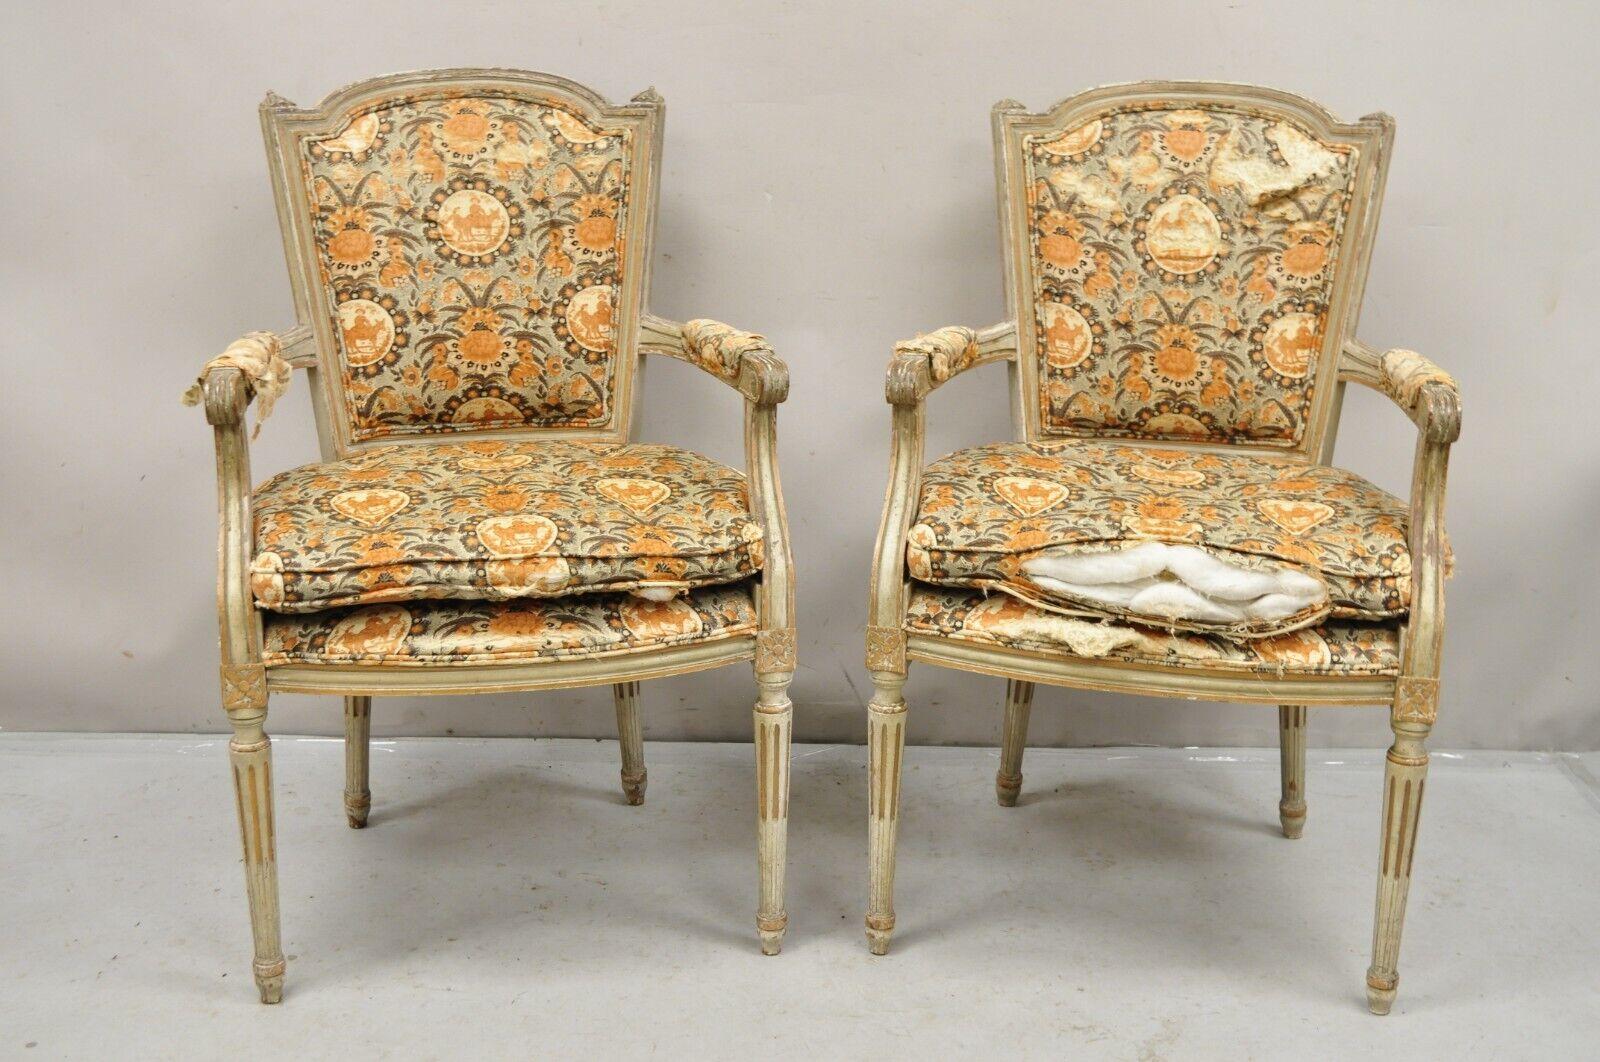 Antique French Louis XVI Style Distressed Cream Painted Fauteuil Arm Chairs - a Pair. Circa Early 1900s. Measurements: 38.5